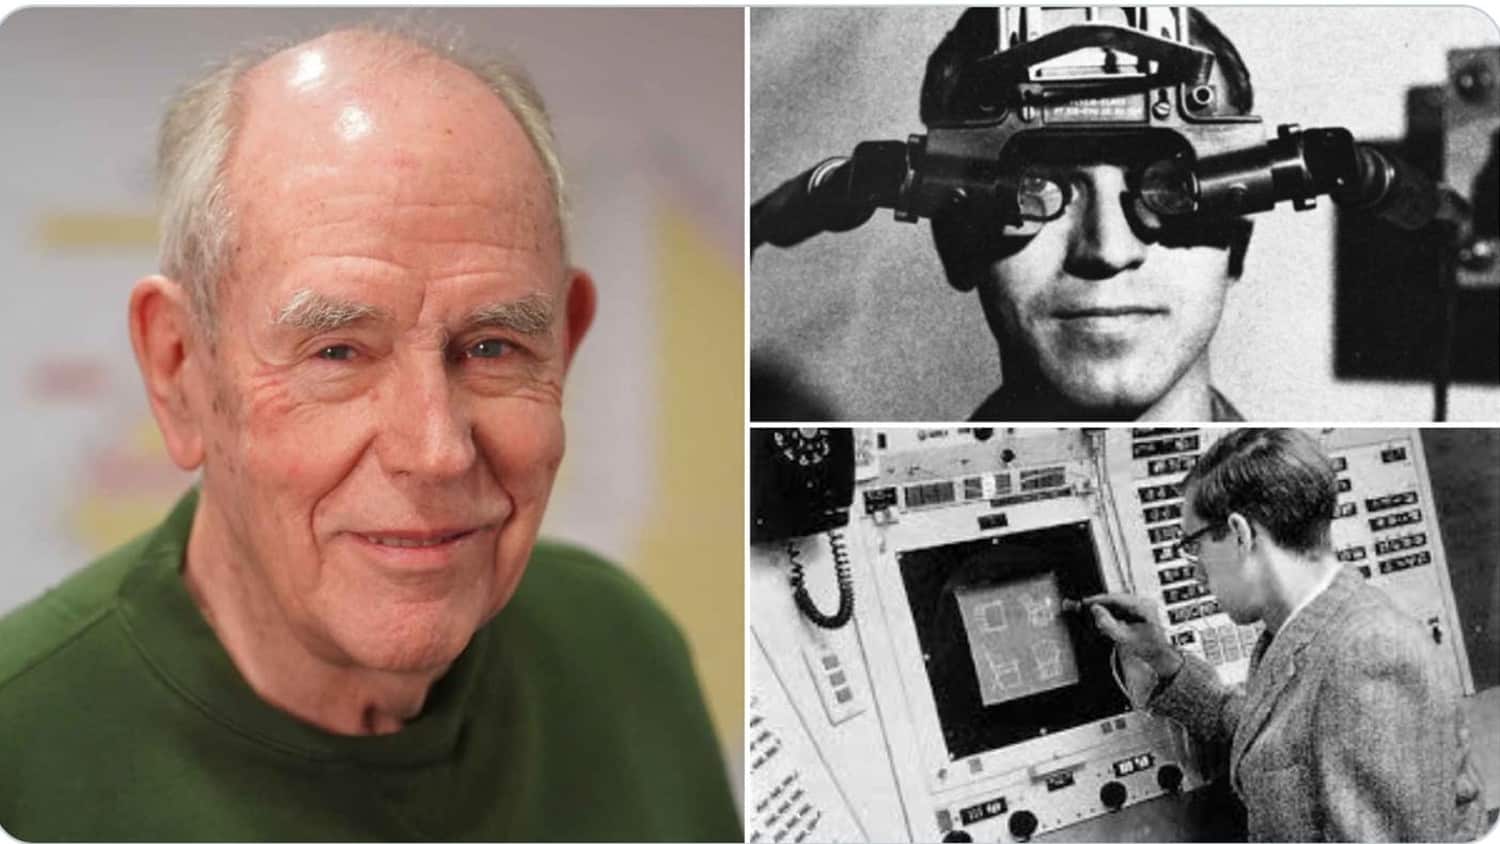 Ivan Sutherland is an American engineer and computer scientist born in 1938.